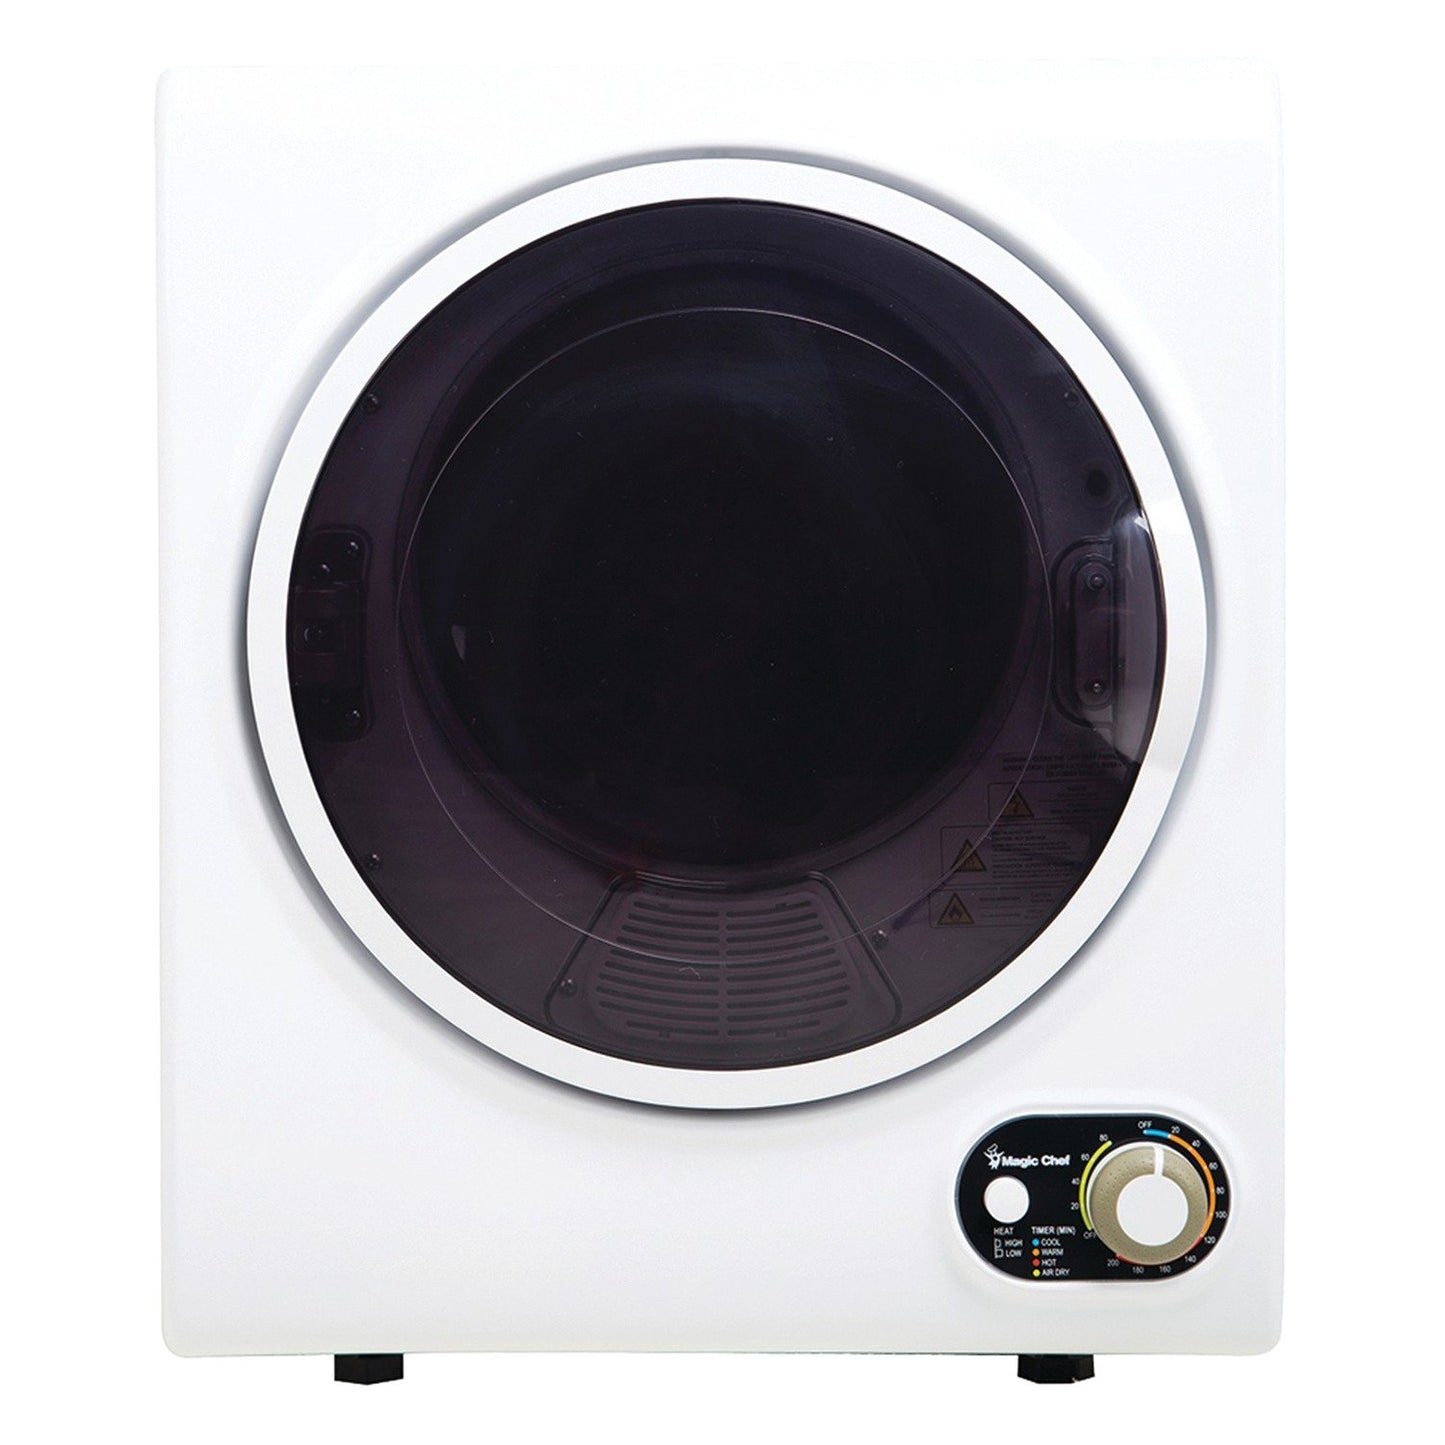 MAGIC CHEF MCSDRY15W 1.5 Cubic-Foot Compact Electric Dryer